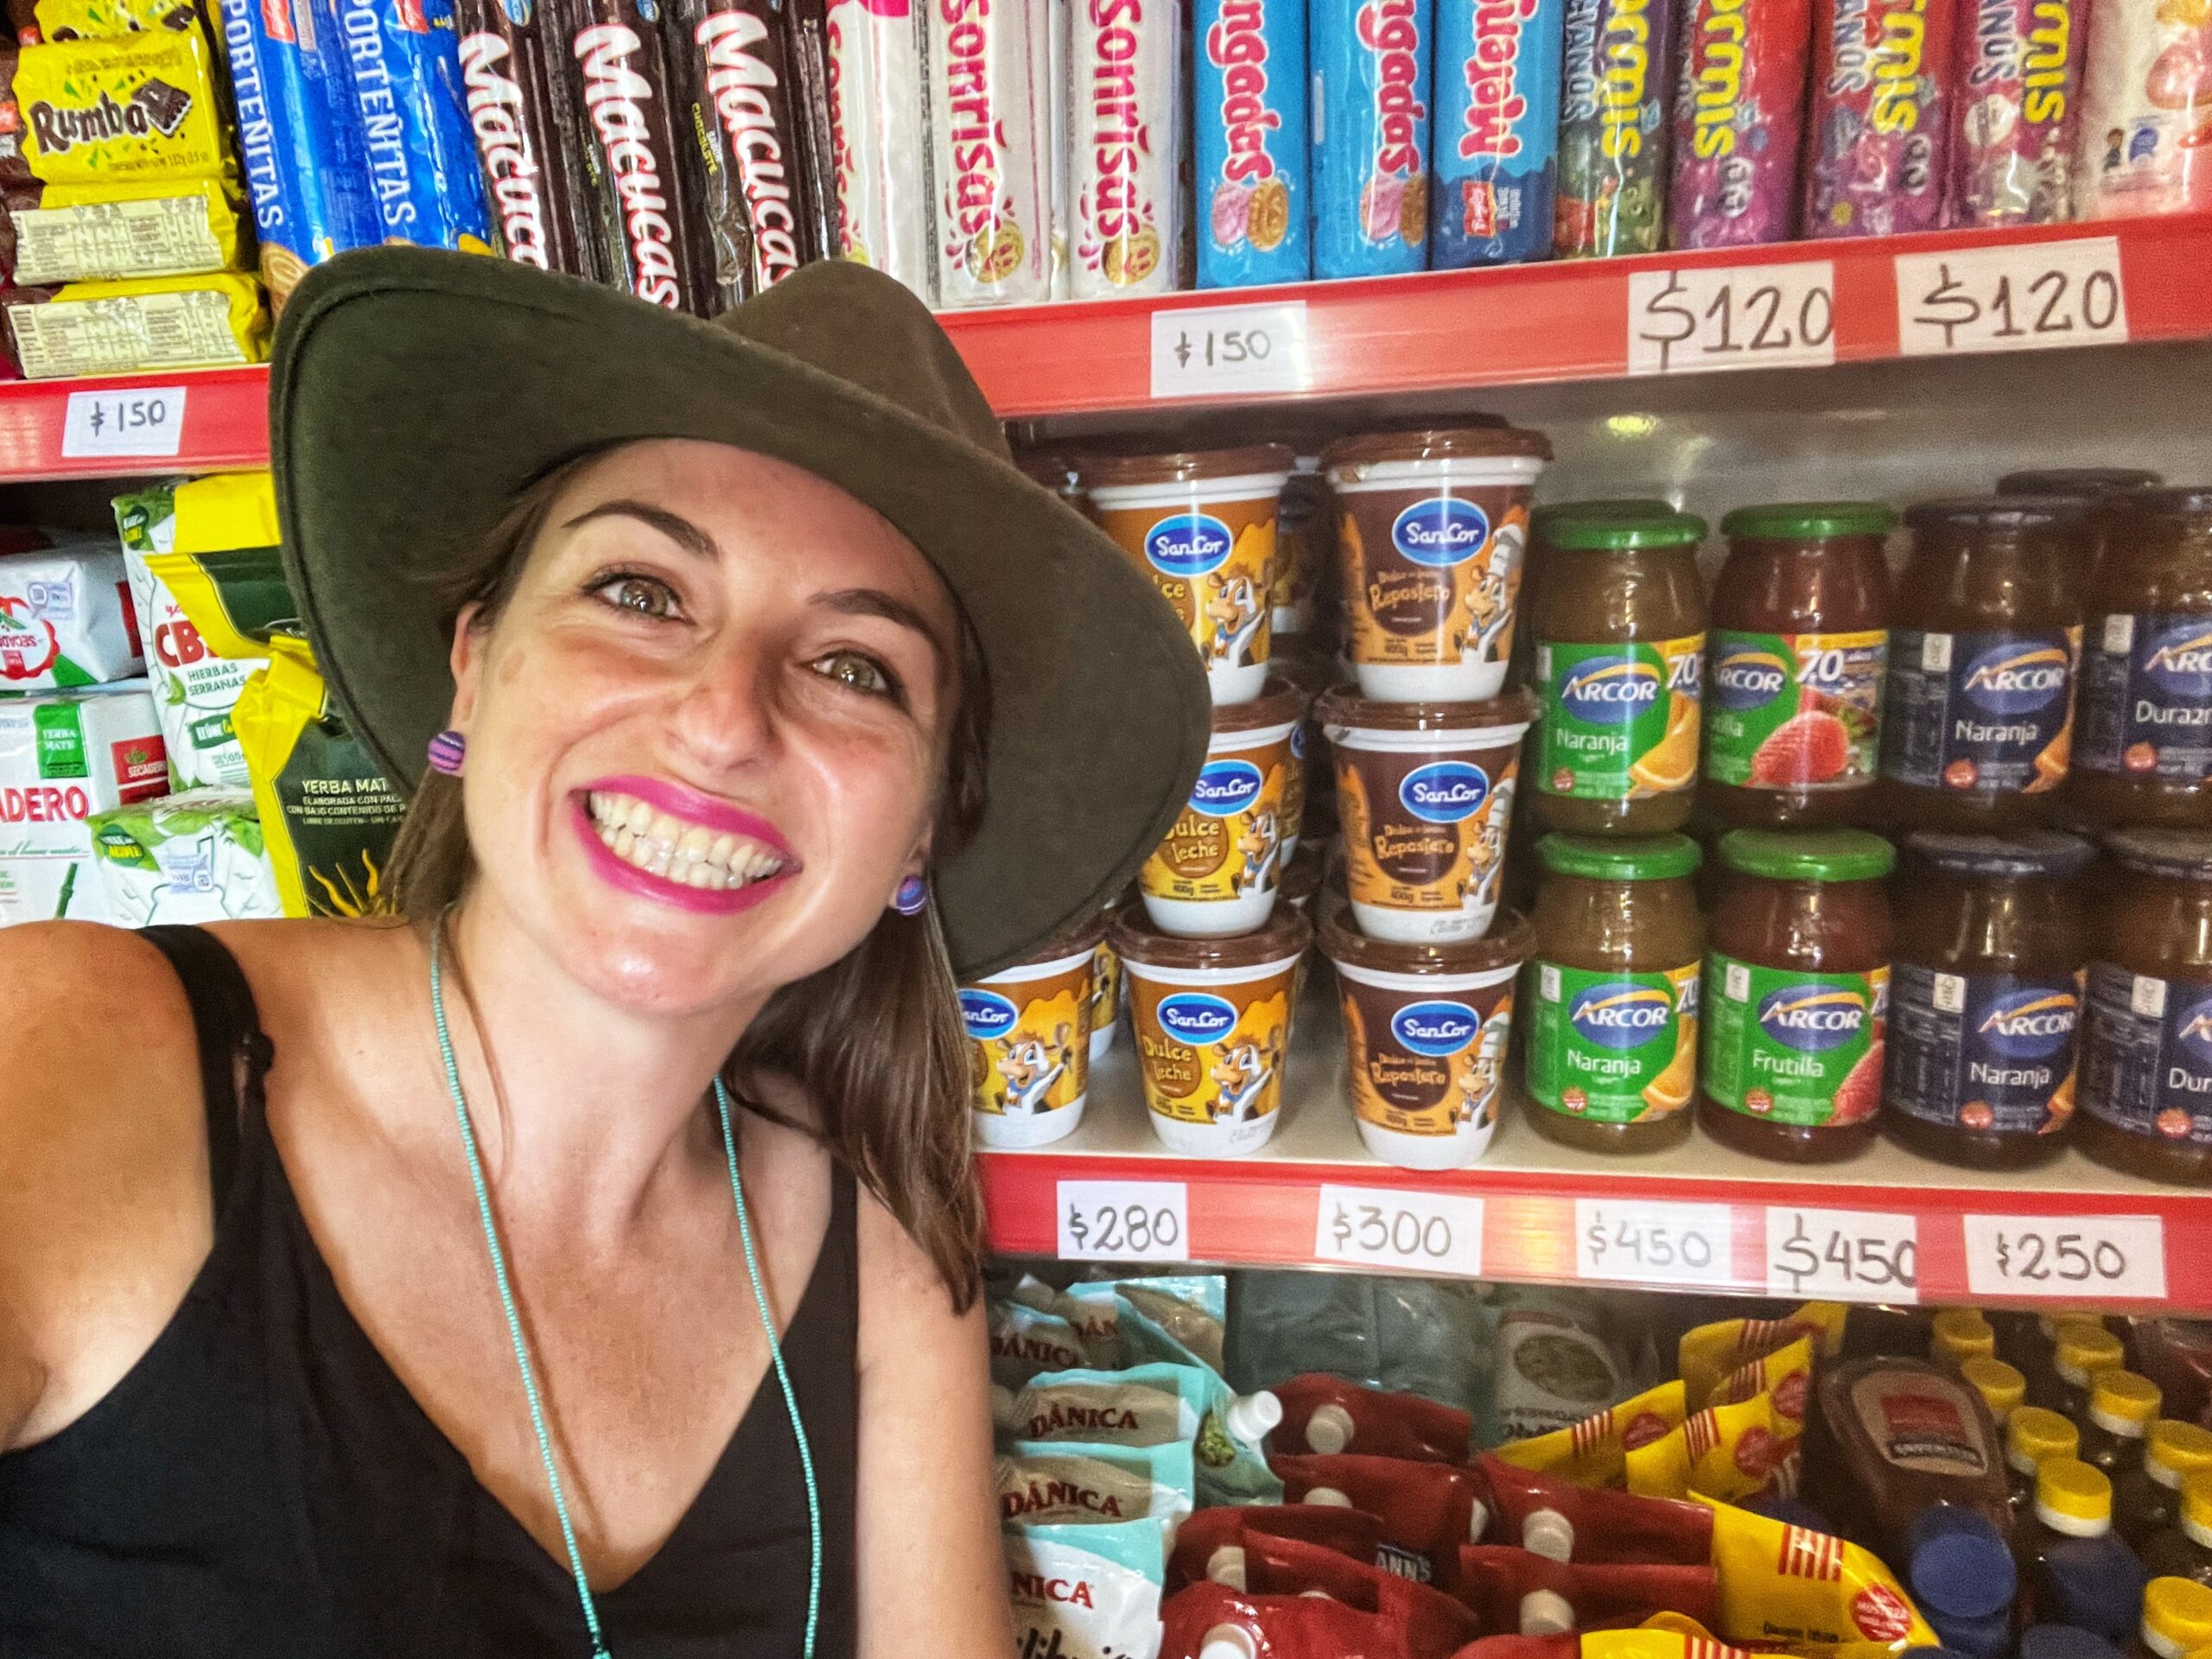 Ashley Lawson posing in front of a supermarket shelf with jams and candies